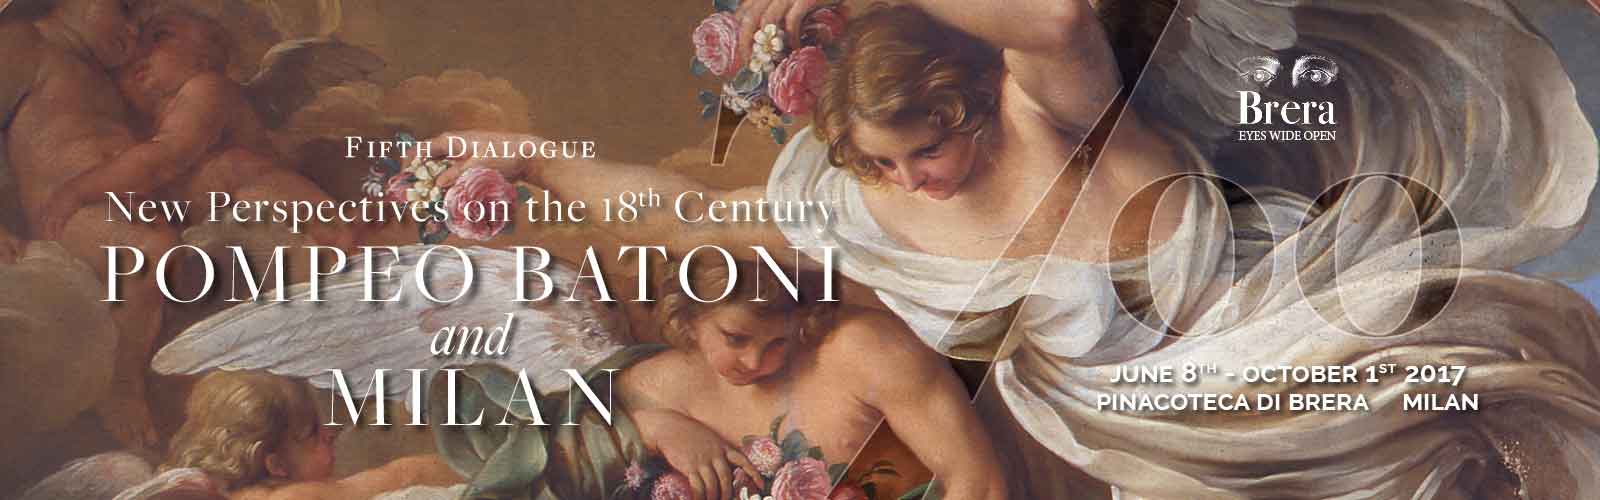 Fifth Dialogue “New Perspectives on the 18th Century. Pompeo Batoni and Milan”